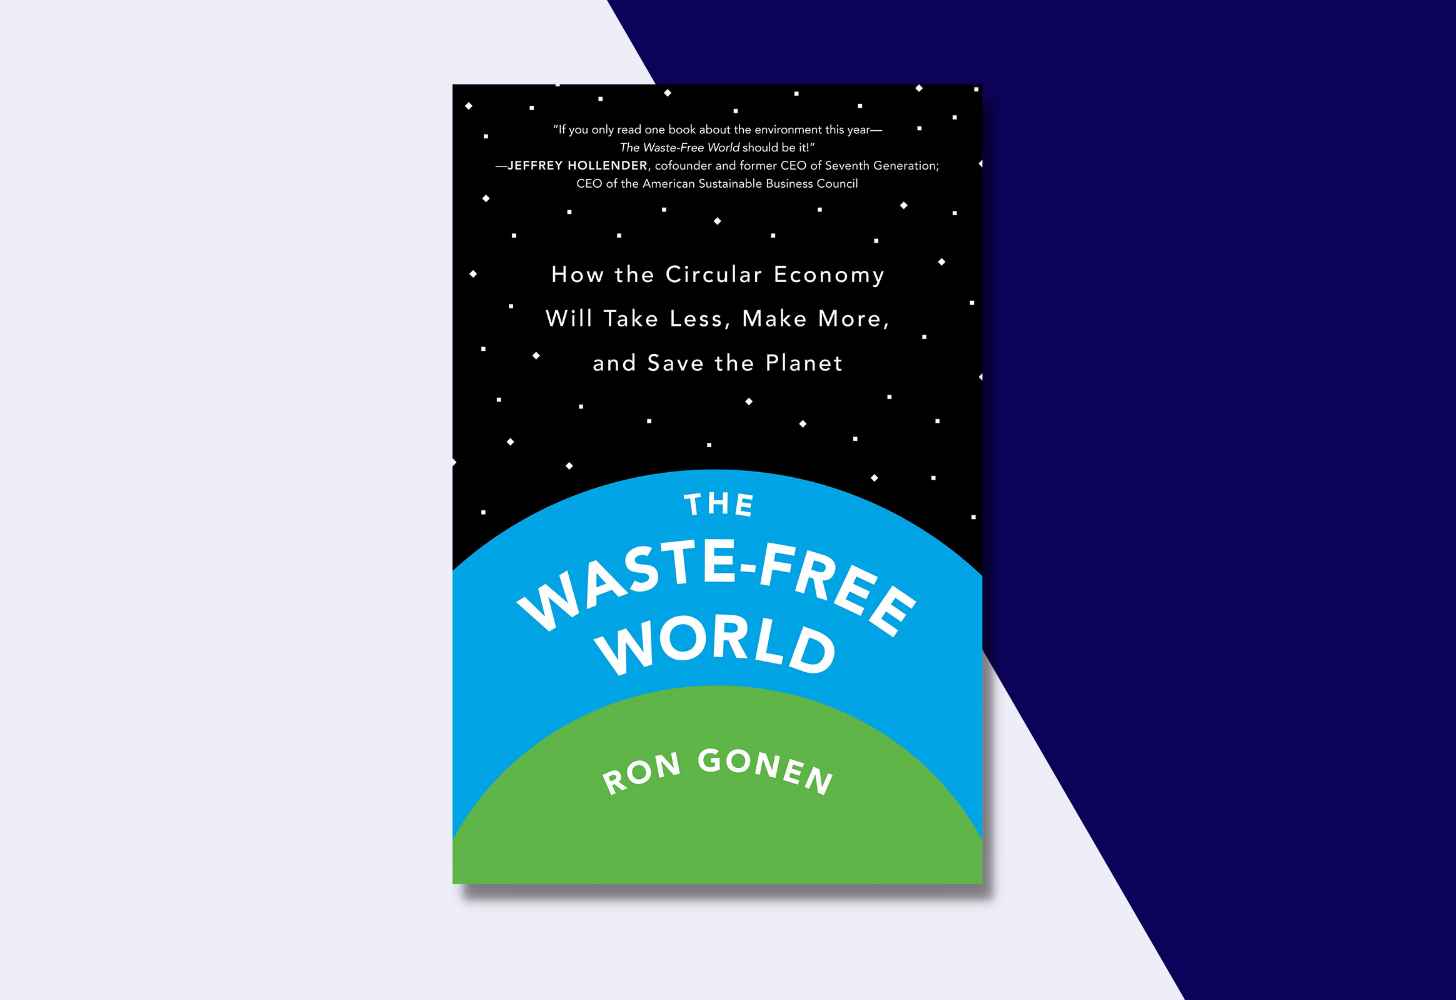 The Cover Of “The Waste-Free World: How the Circular Economy Will Take Less, Make More, and Save the Planet” by Ron Gonen